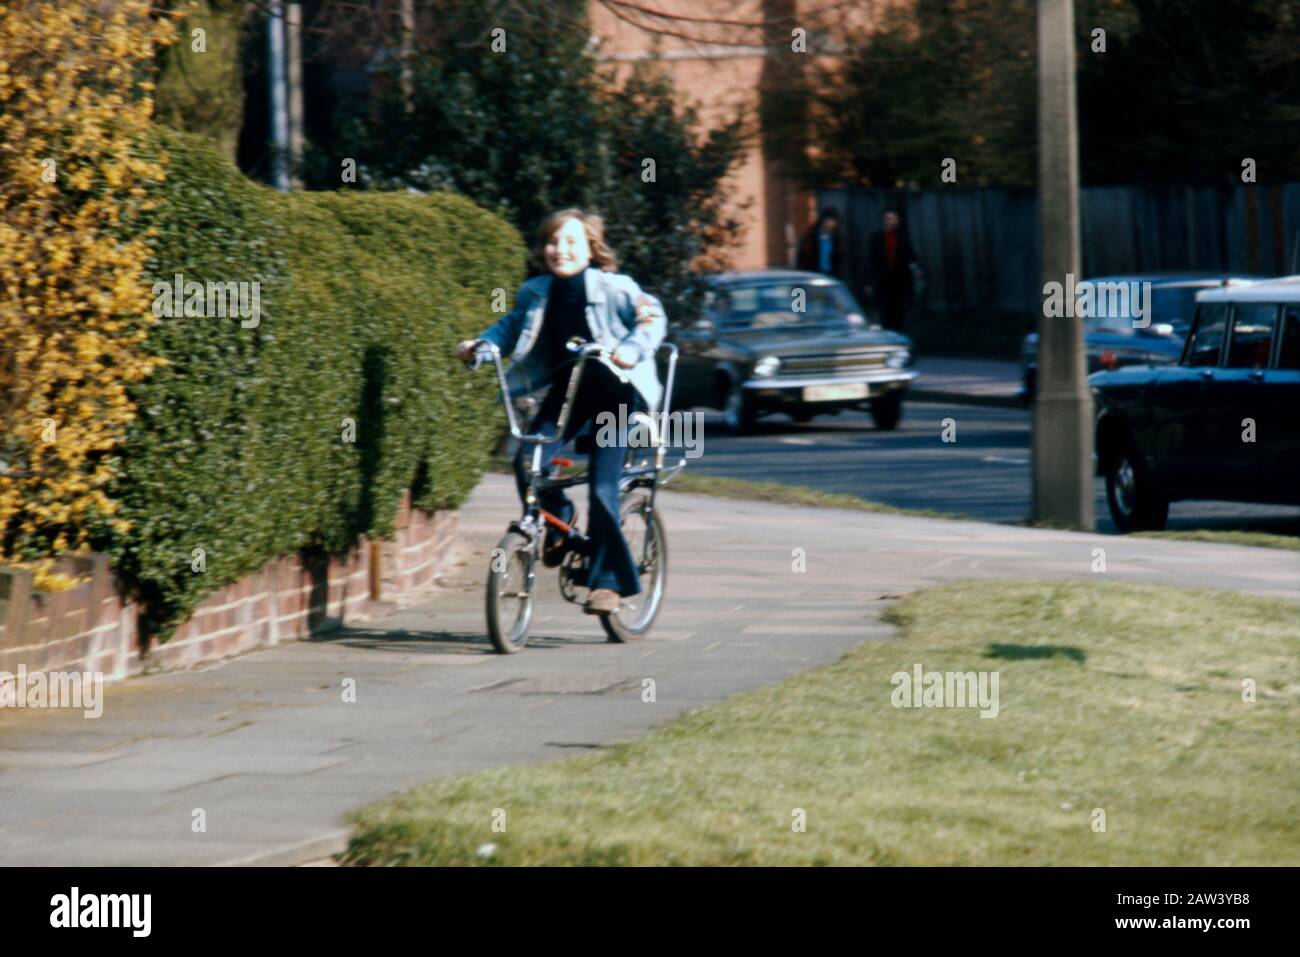 An 11 year old boy riding his new Raleigh Chopper American export bike in 1973 in the suburbs of London UK. Stock Photo